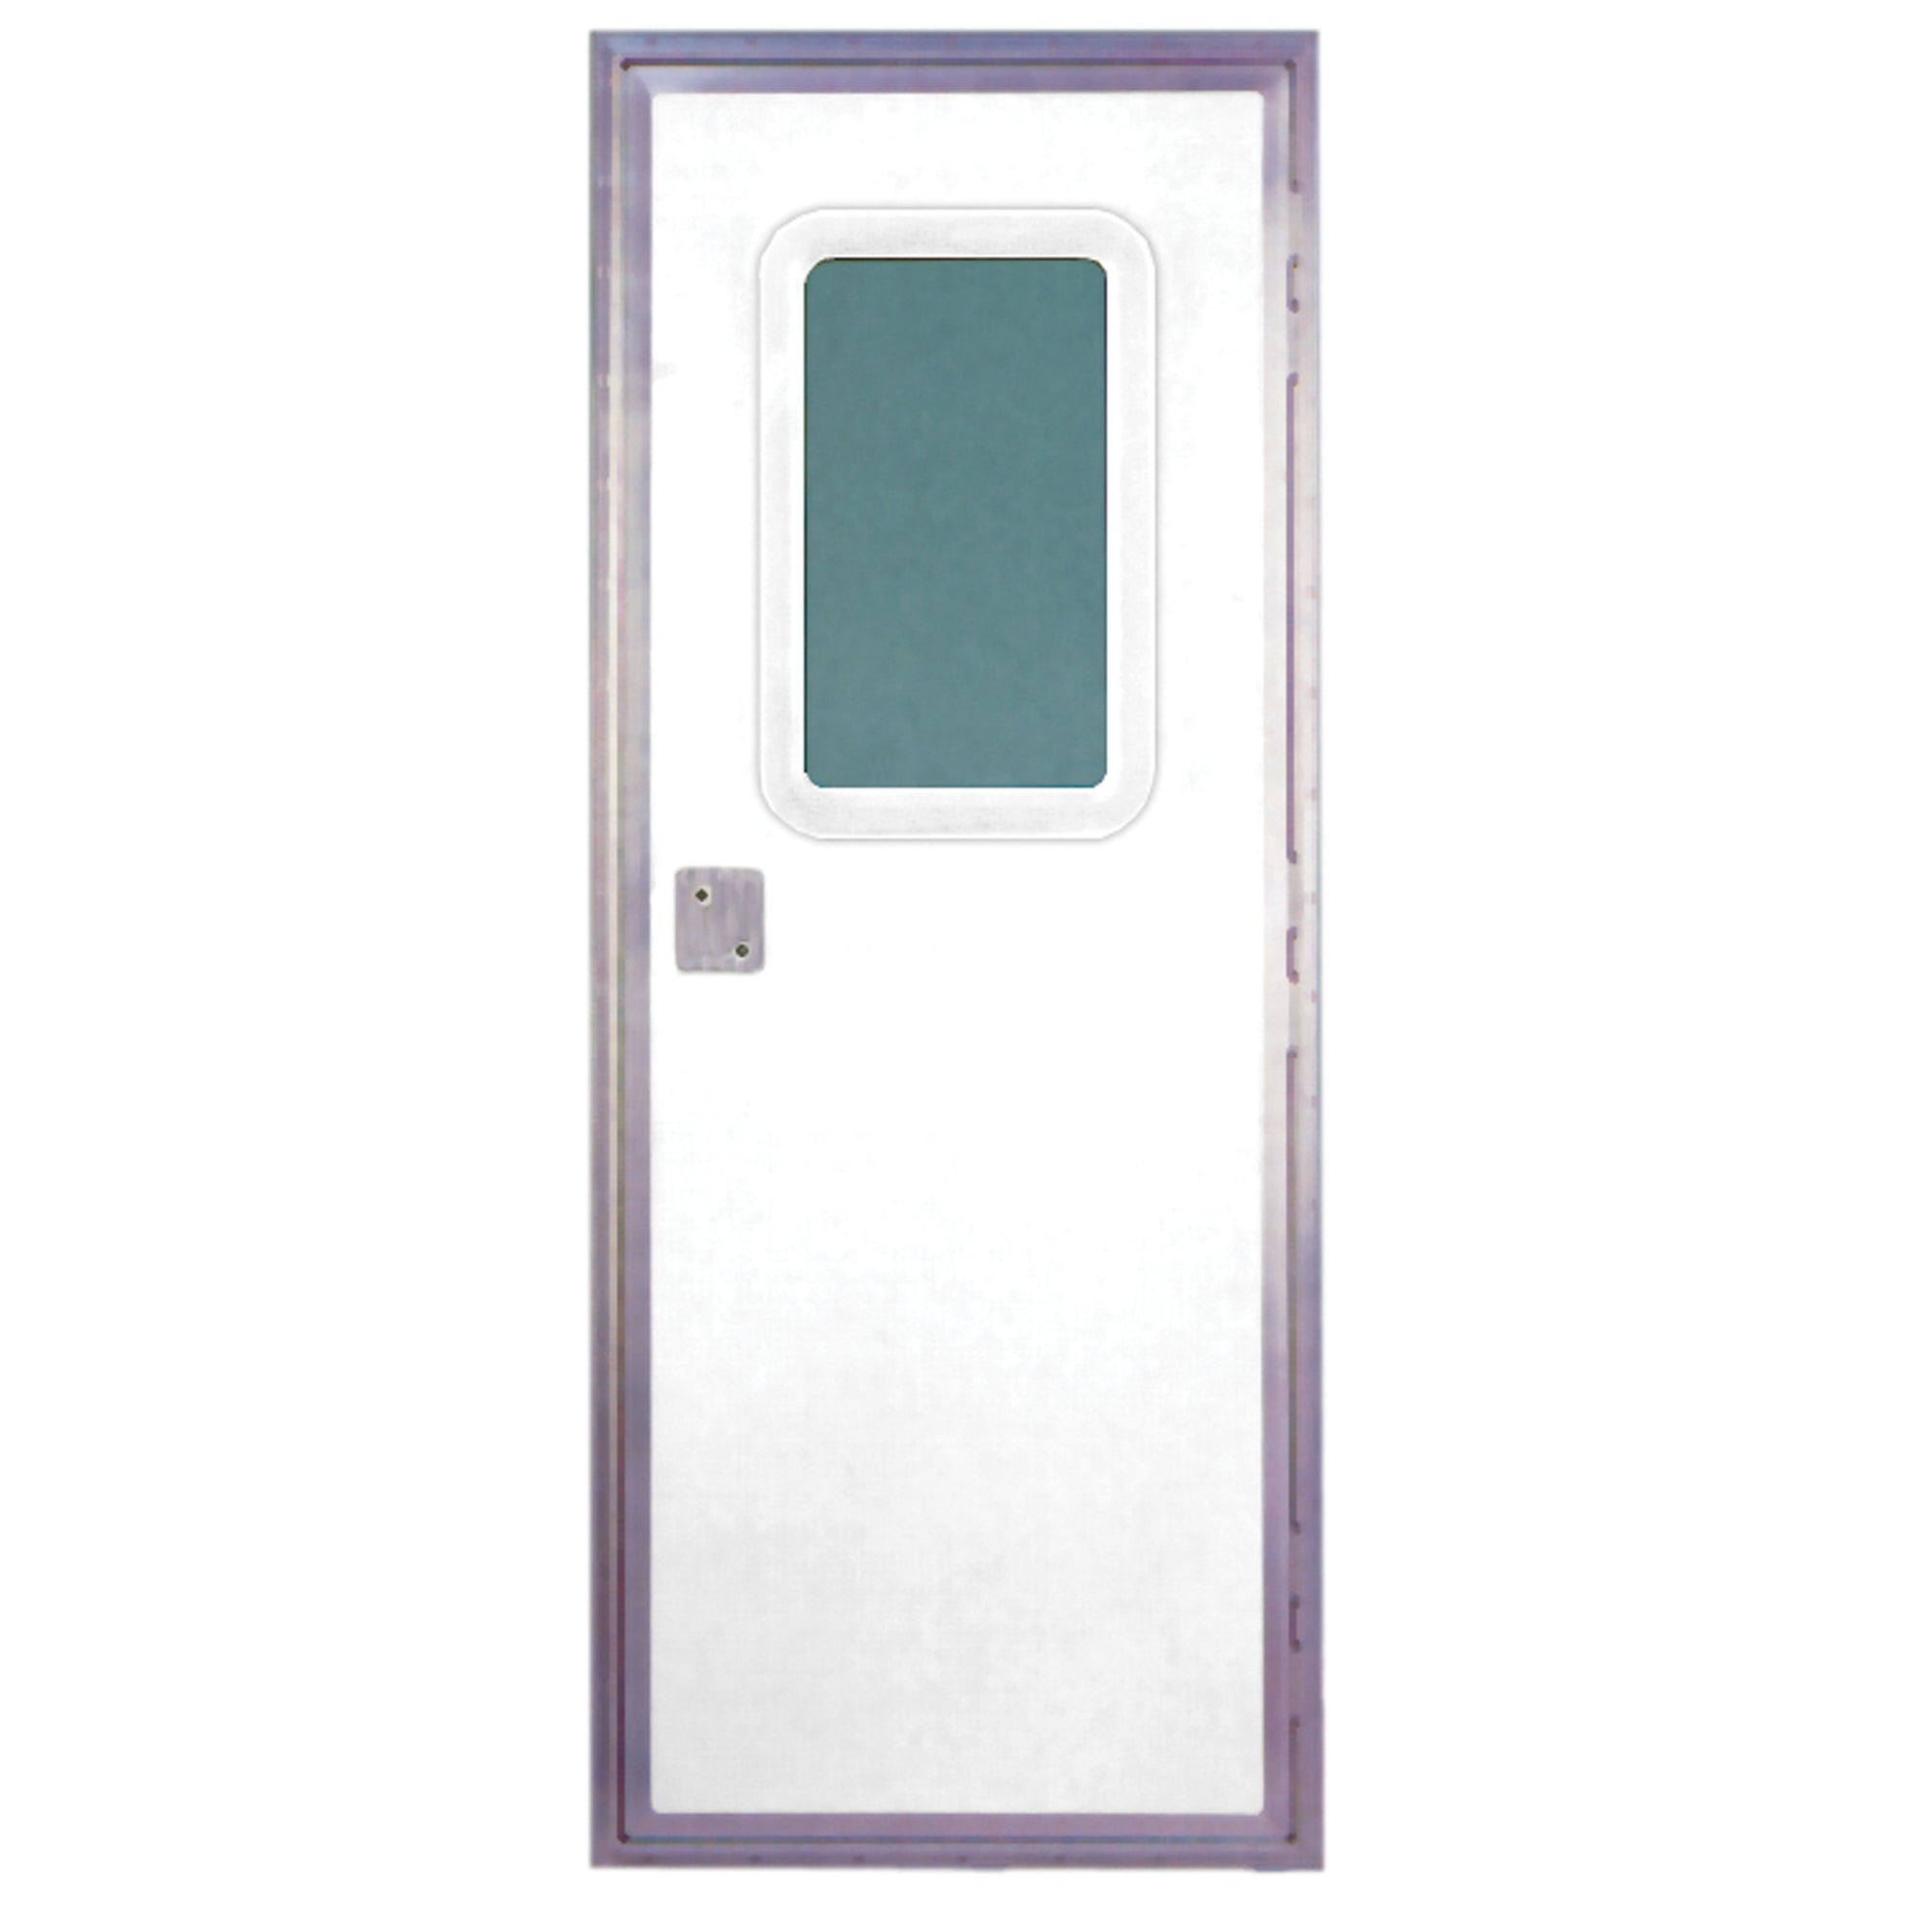 Dexter 5050NW-GL4261 LOCK RV Door 5050 Series With Obscure Window and Flush Mount Lock - 24" x 76", RH, White